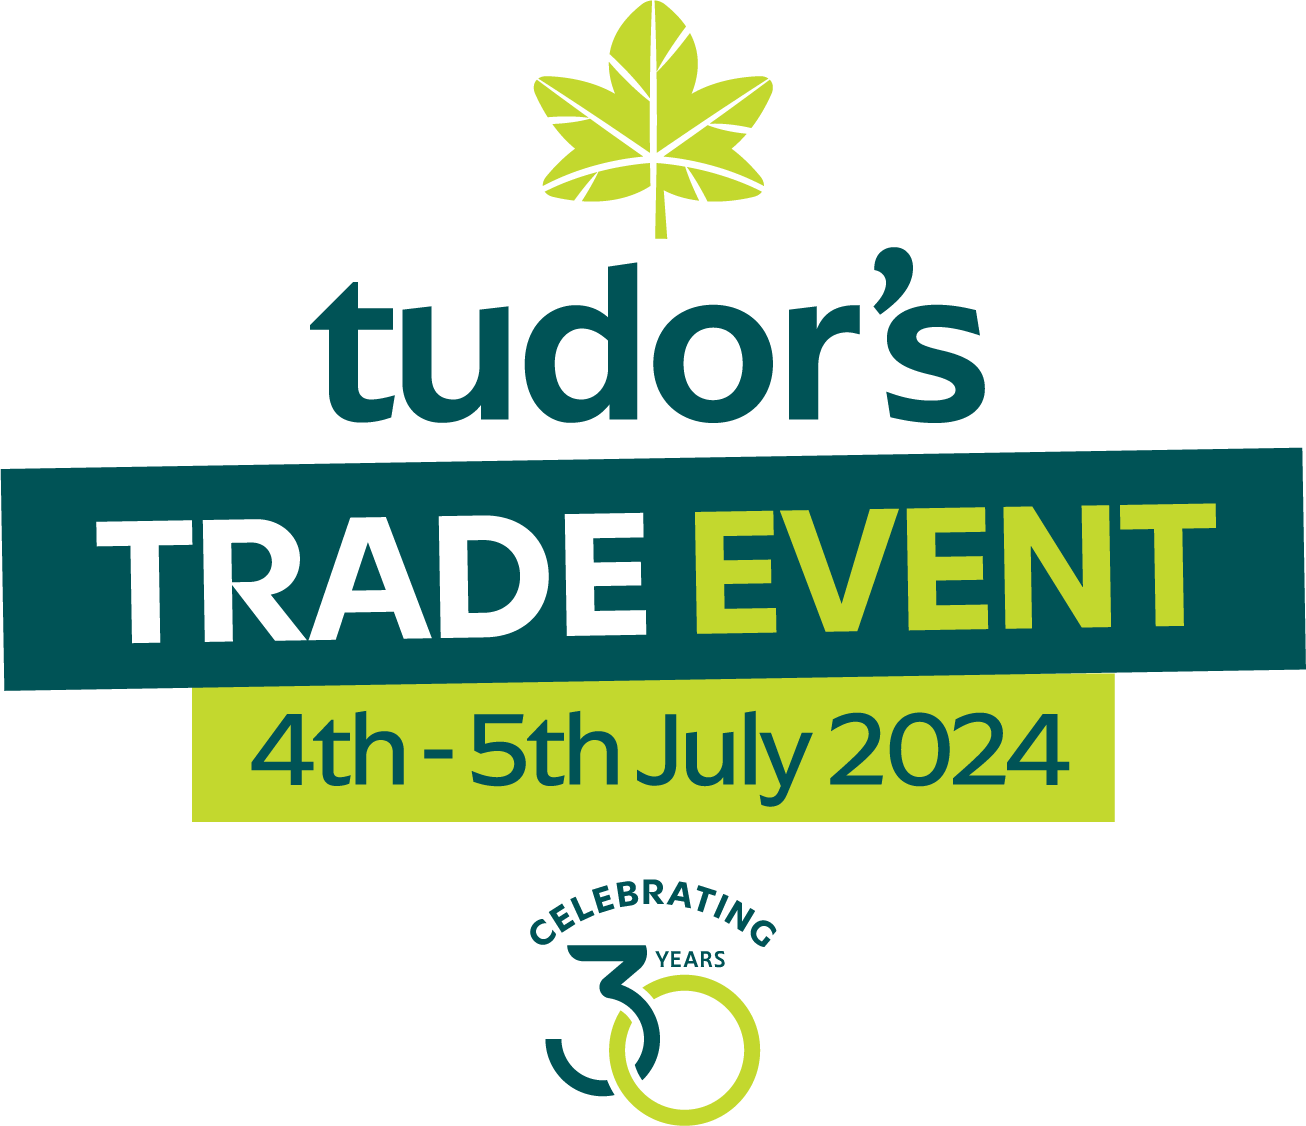 We are attending the Tudor Environmental Trade Event.